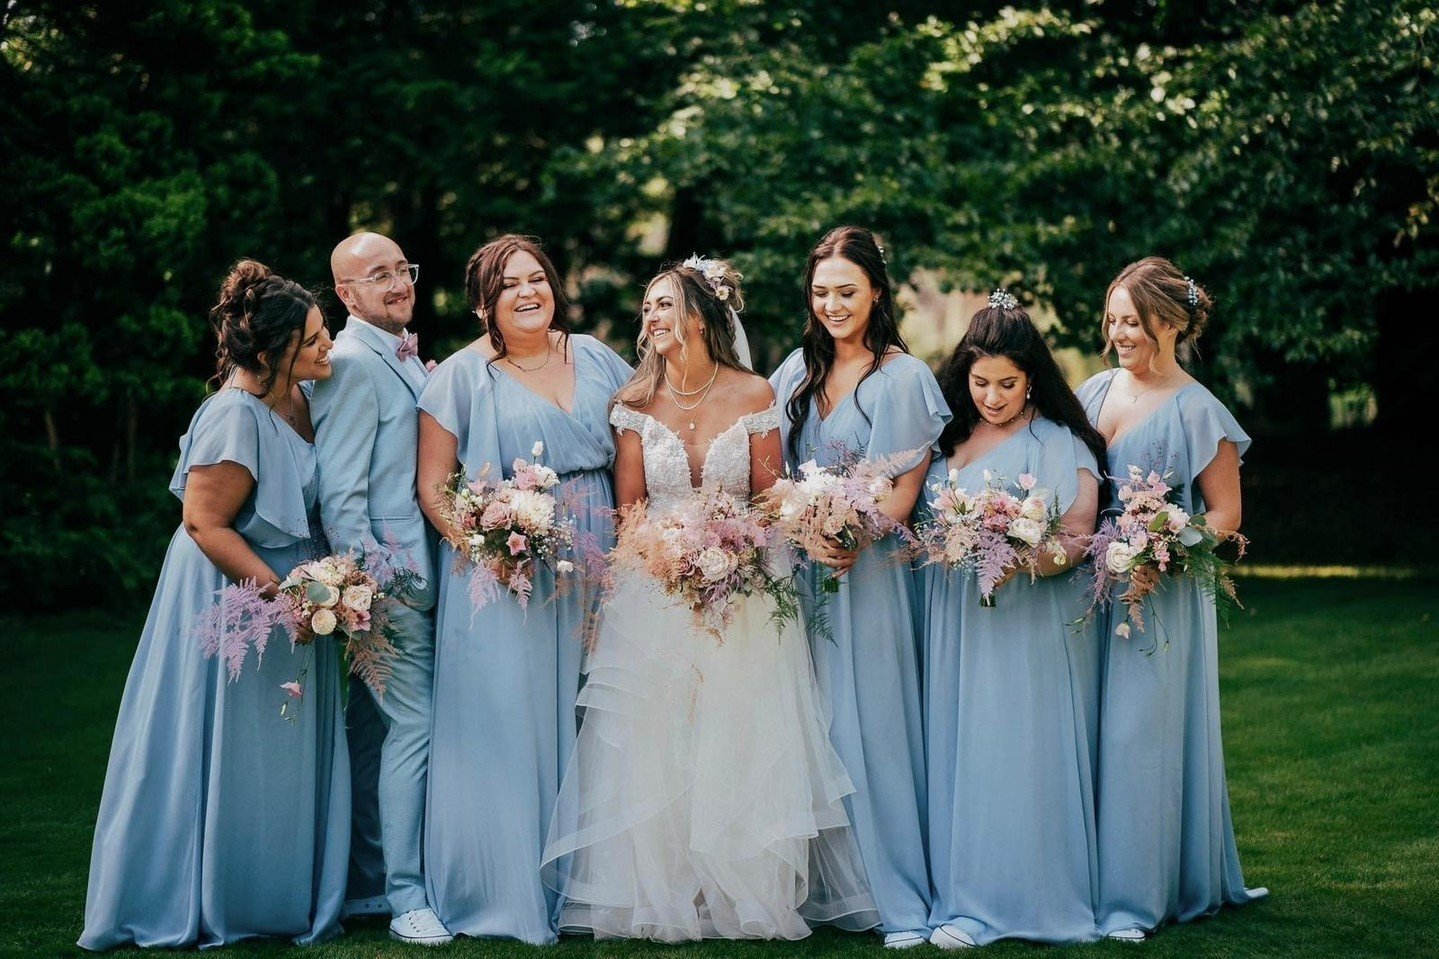 Flowers With Passion for all your Bride Tribe bouquets.⁠
⁠
#lancashireweddingflorist #bridalbouquets #bridetribeflowers #flowerswithpassion #ribblevalleyweddings #bridetribe